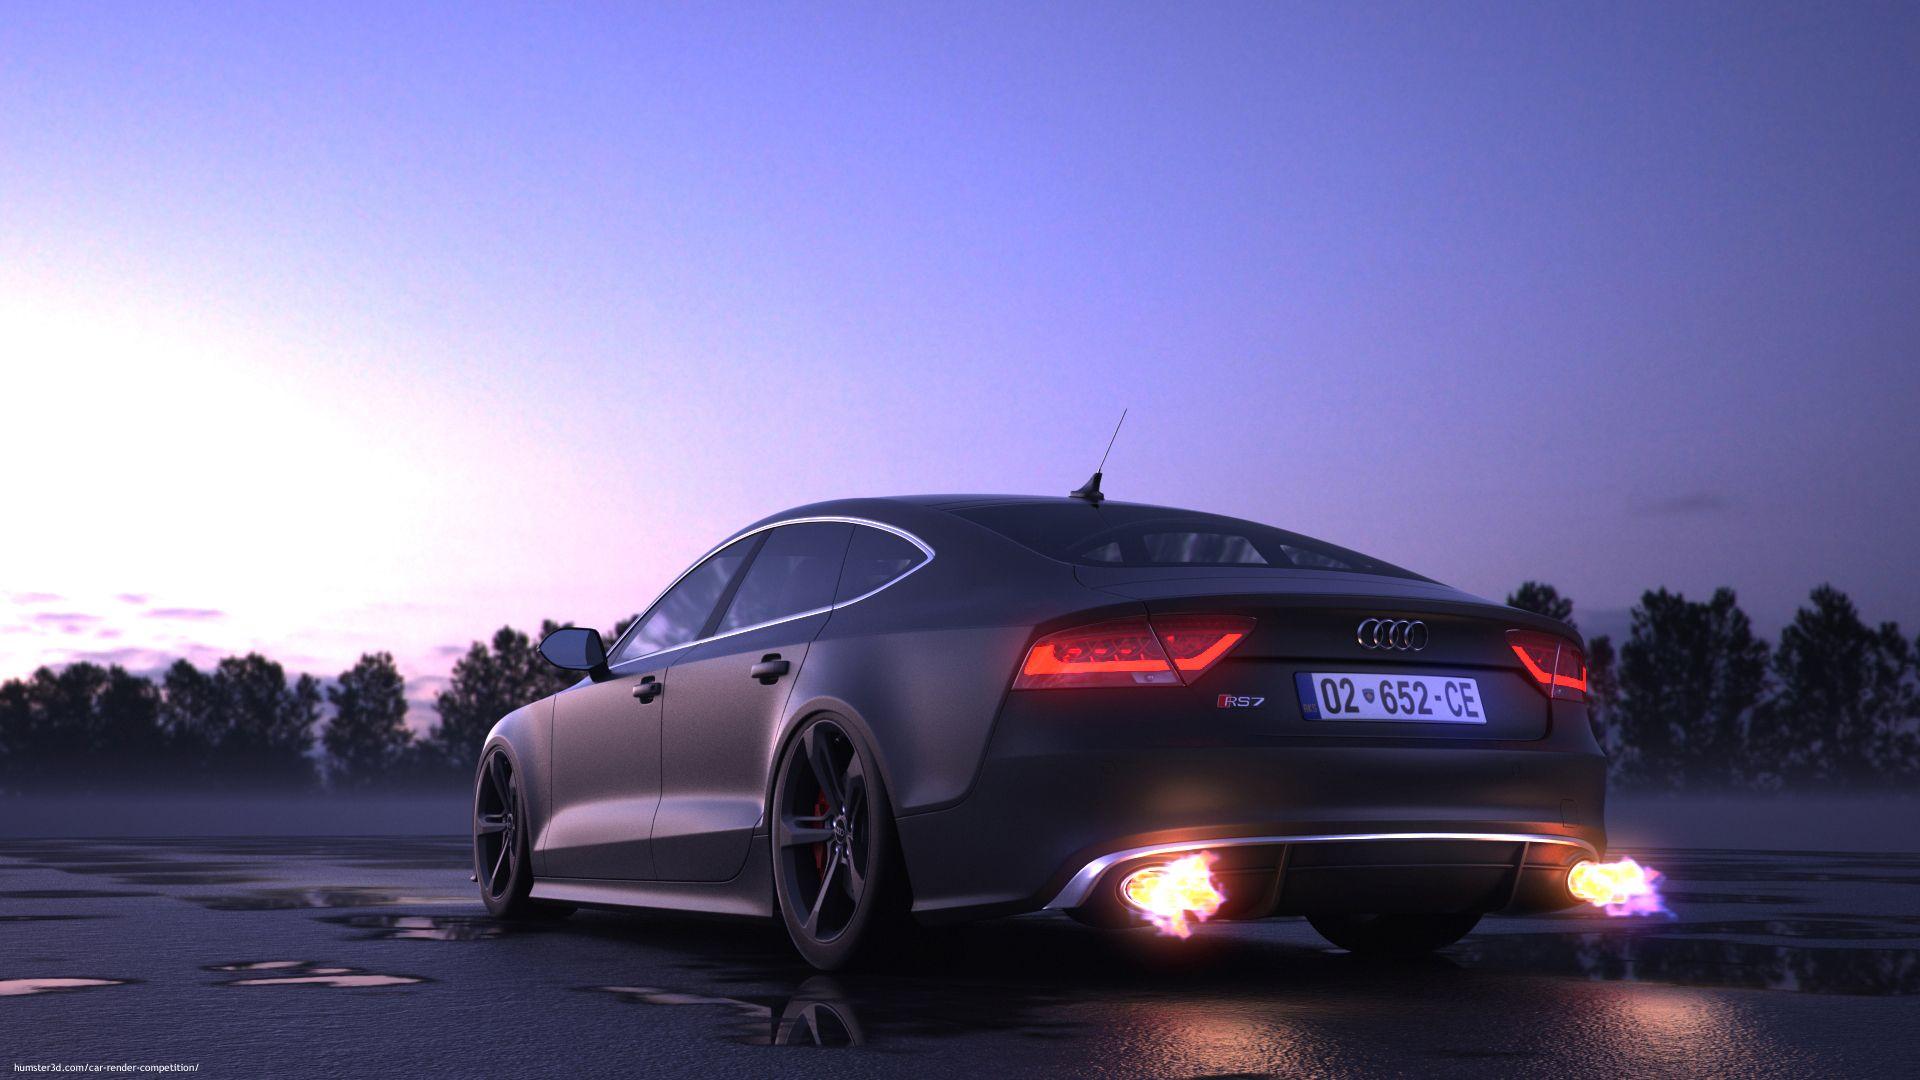 Audi Rs 7 Wallpapers Top Free Audi Rs 7 Backgrounds Wallpaperaccess